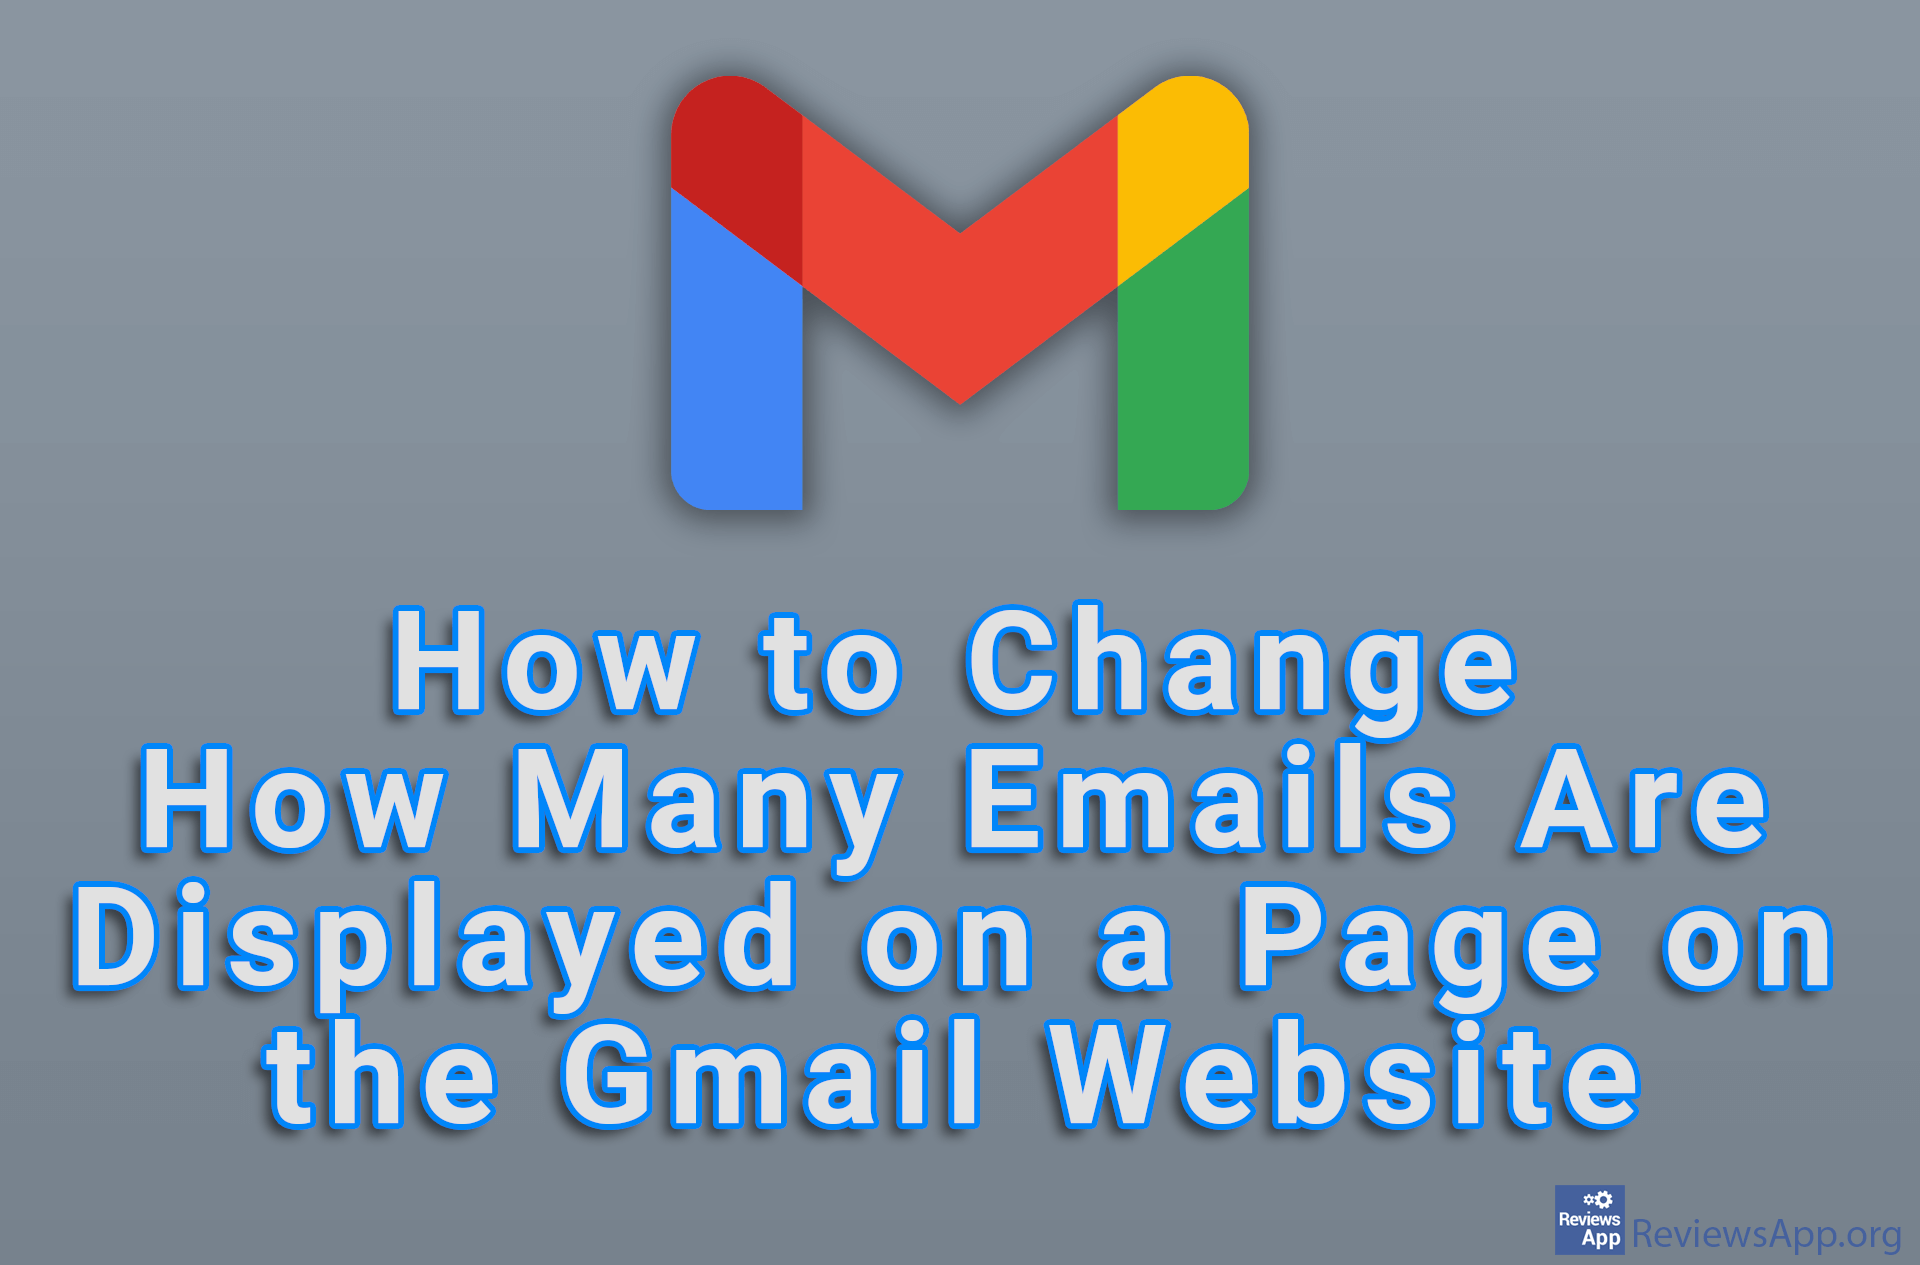 How to Change How Many Emails Are Displayed on a Page on the Gmail Website